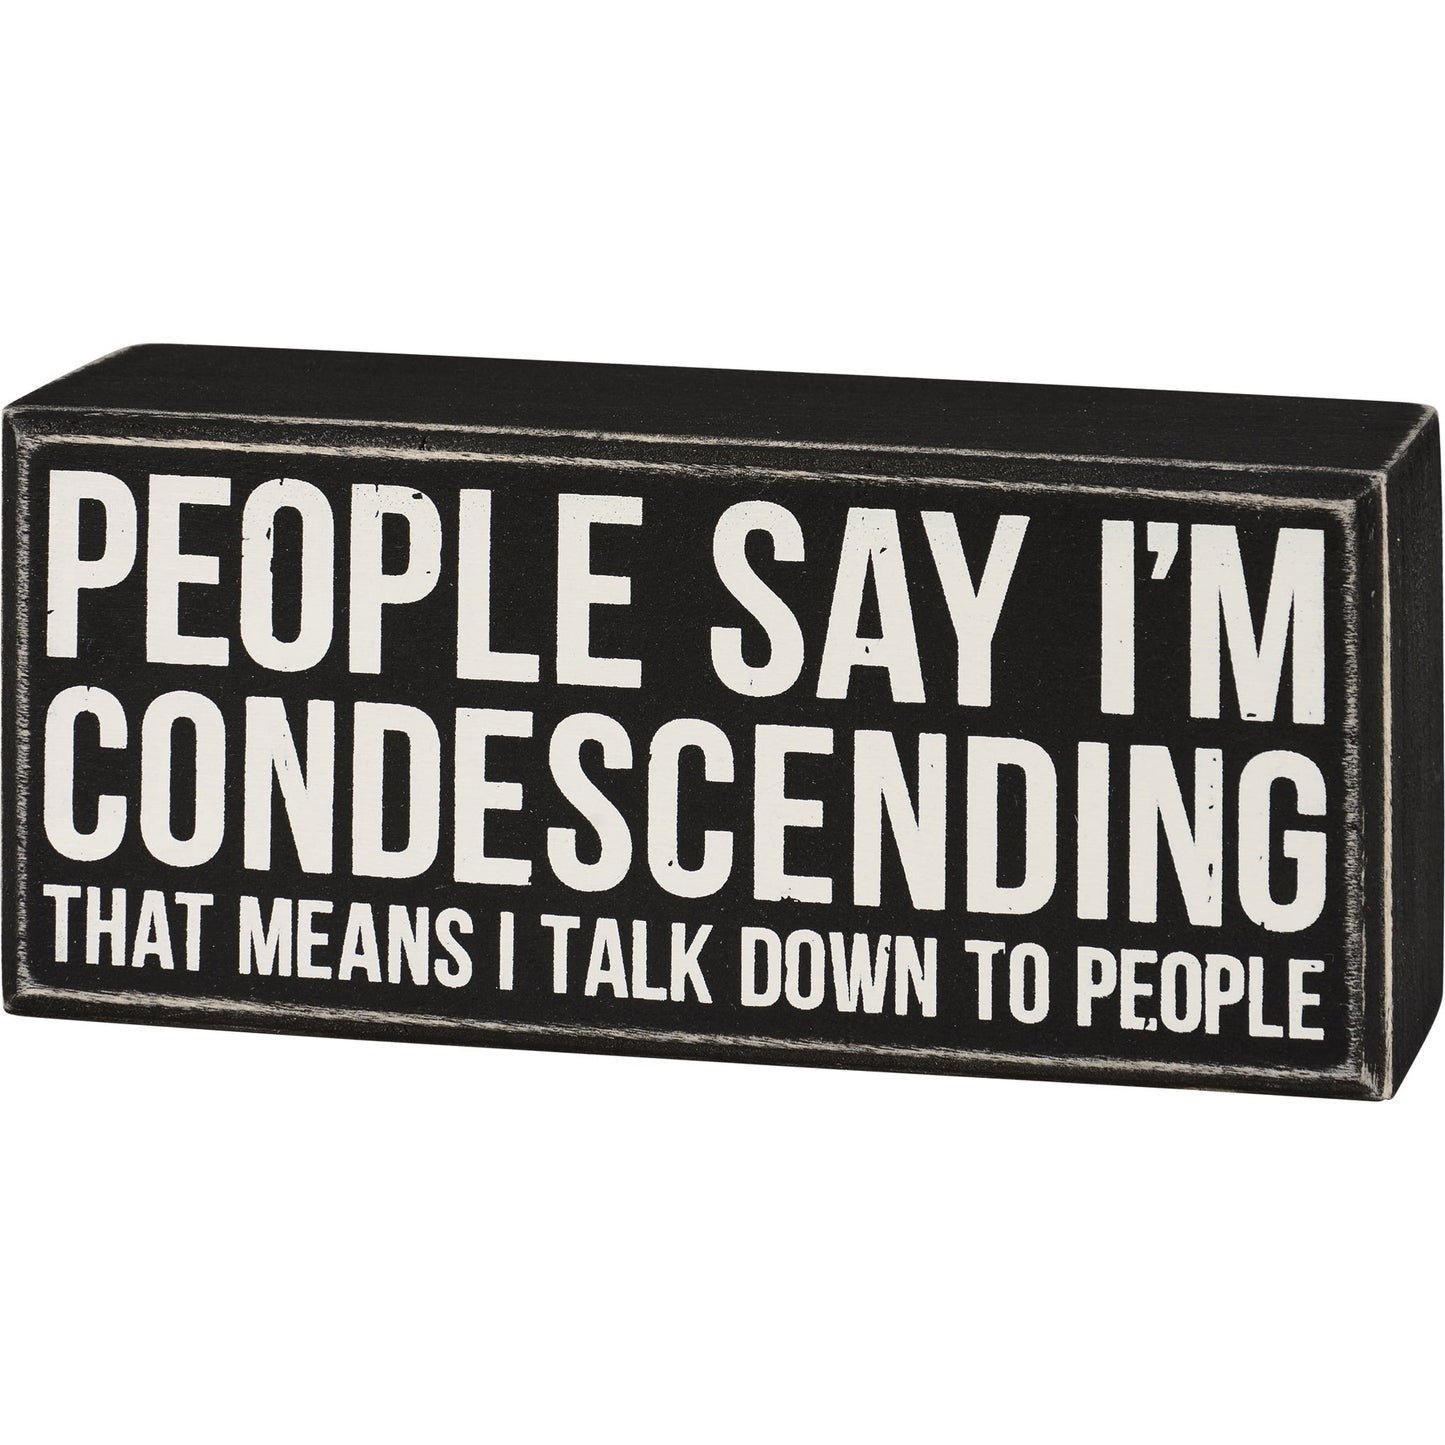 People Say I'm Condescending Wooden Box Sign | Rude Desk Wall Display | 5.50" x 2.50"